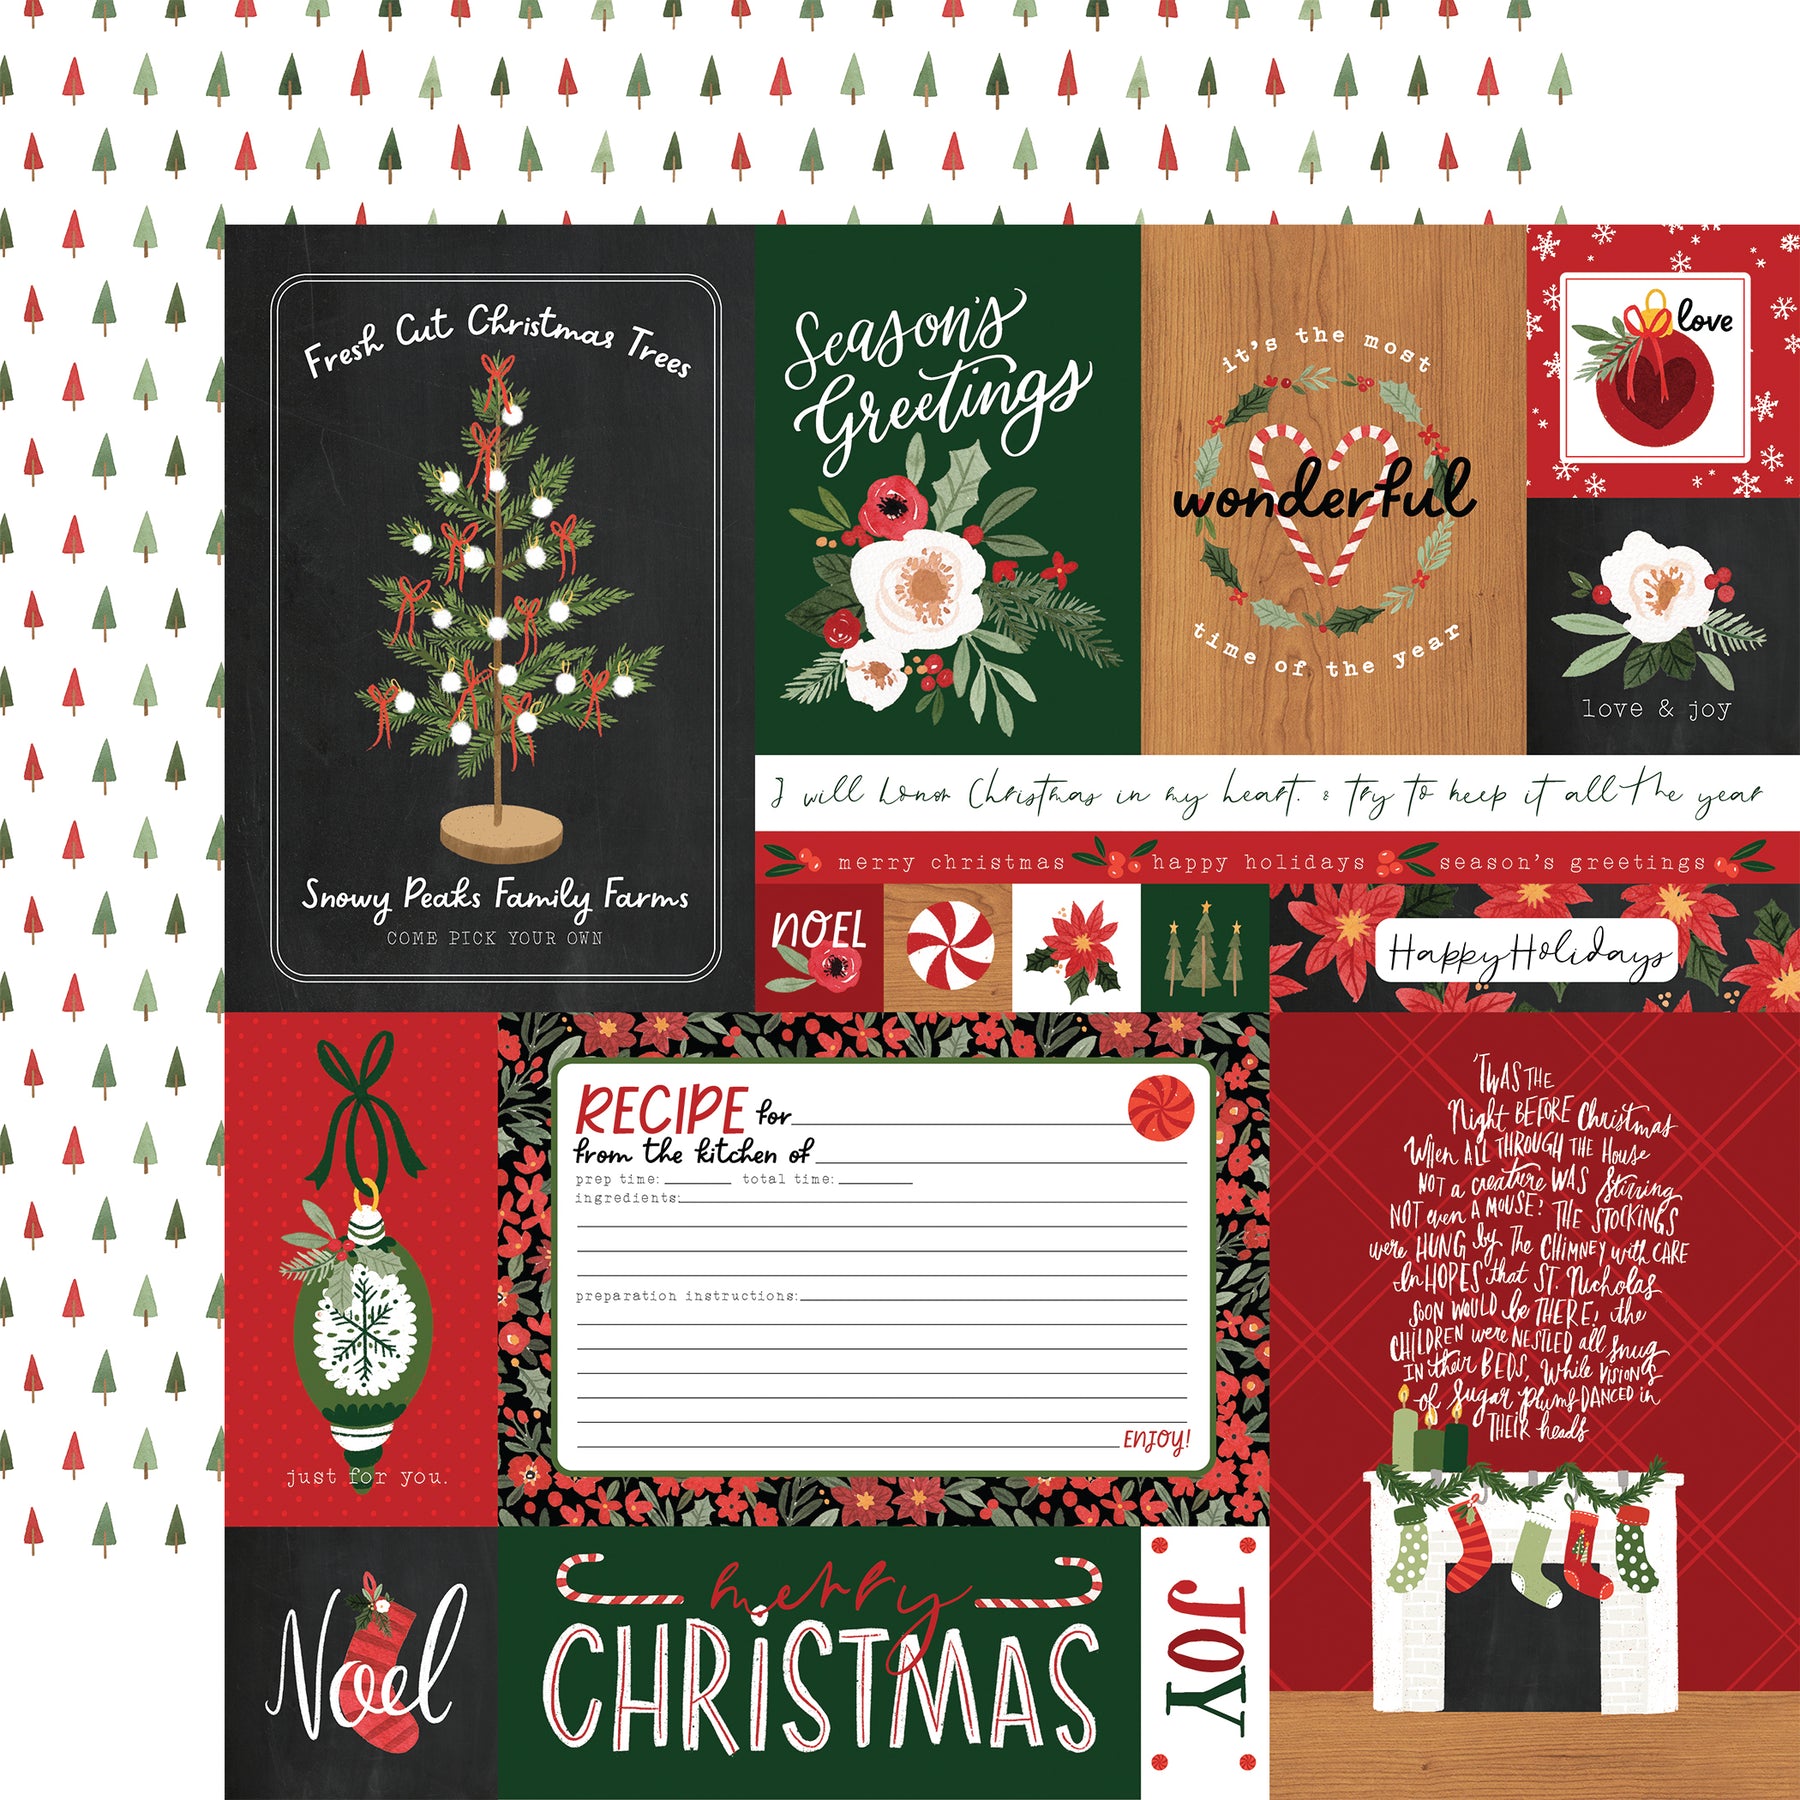 HAPPY CHRISTMAS 12x12 Collection Kit - Carta Bella – The 12x12 Cardstock  Shop